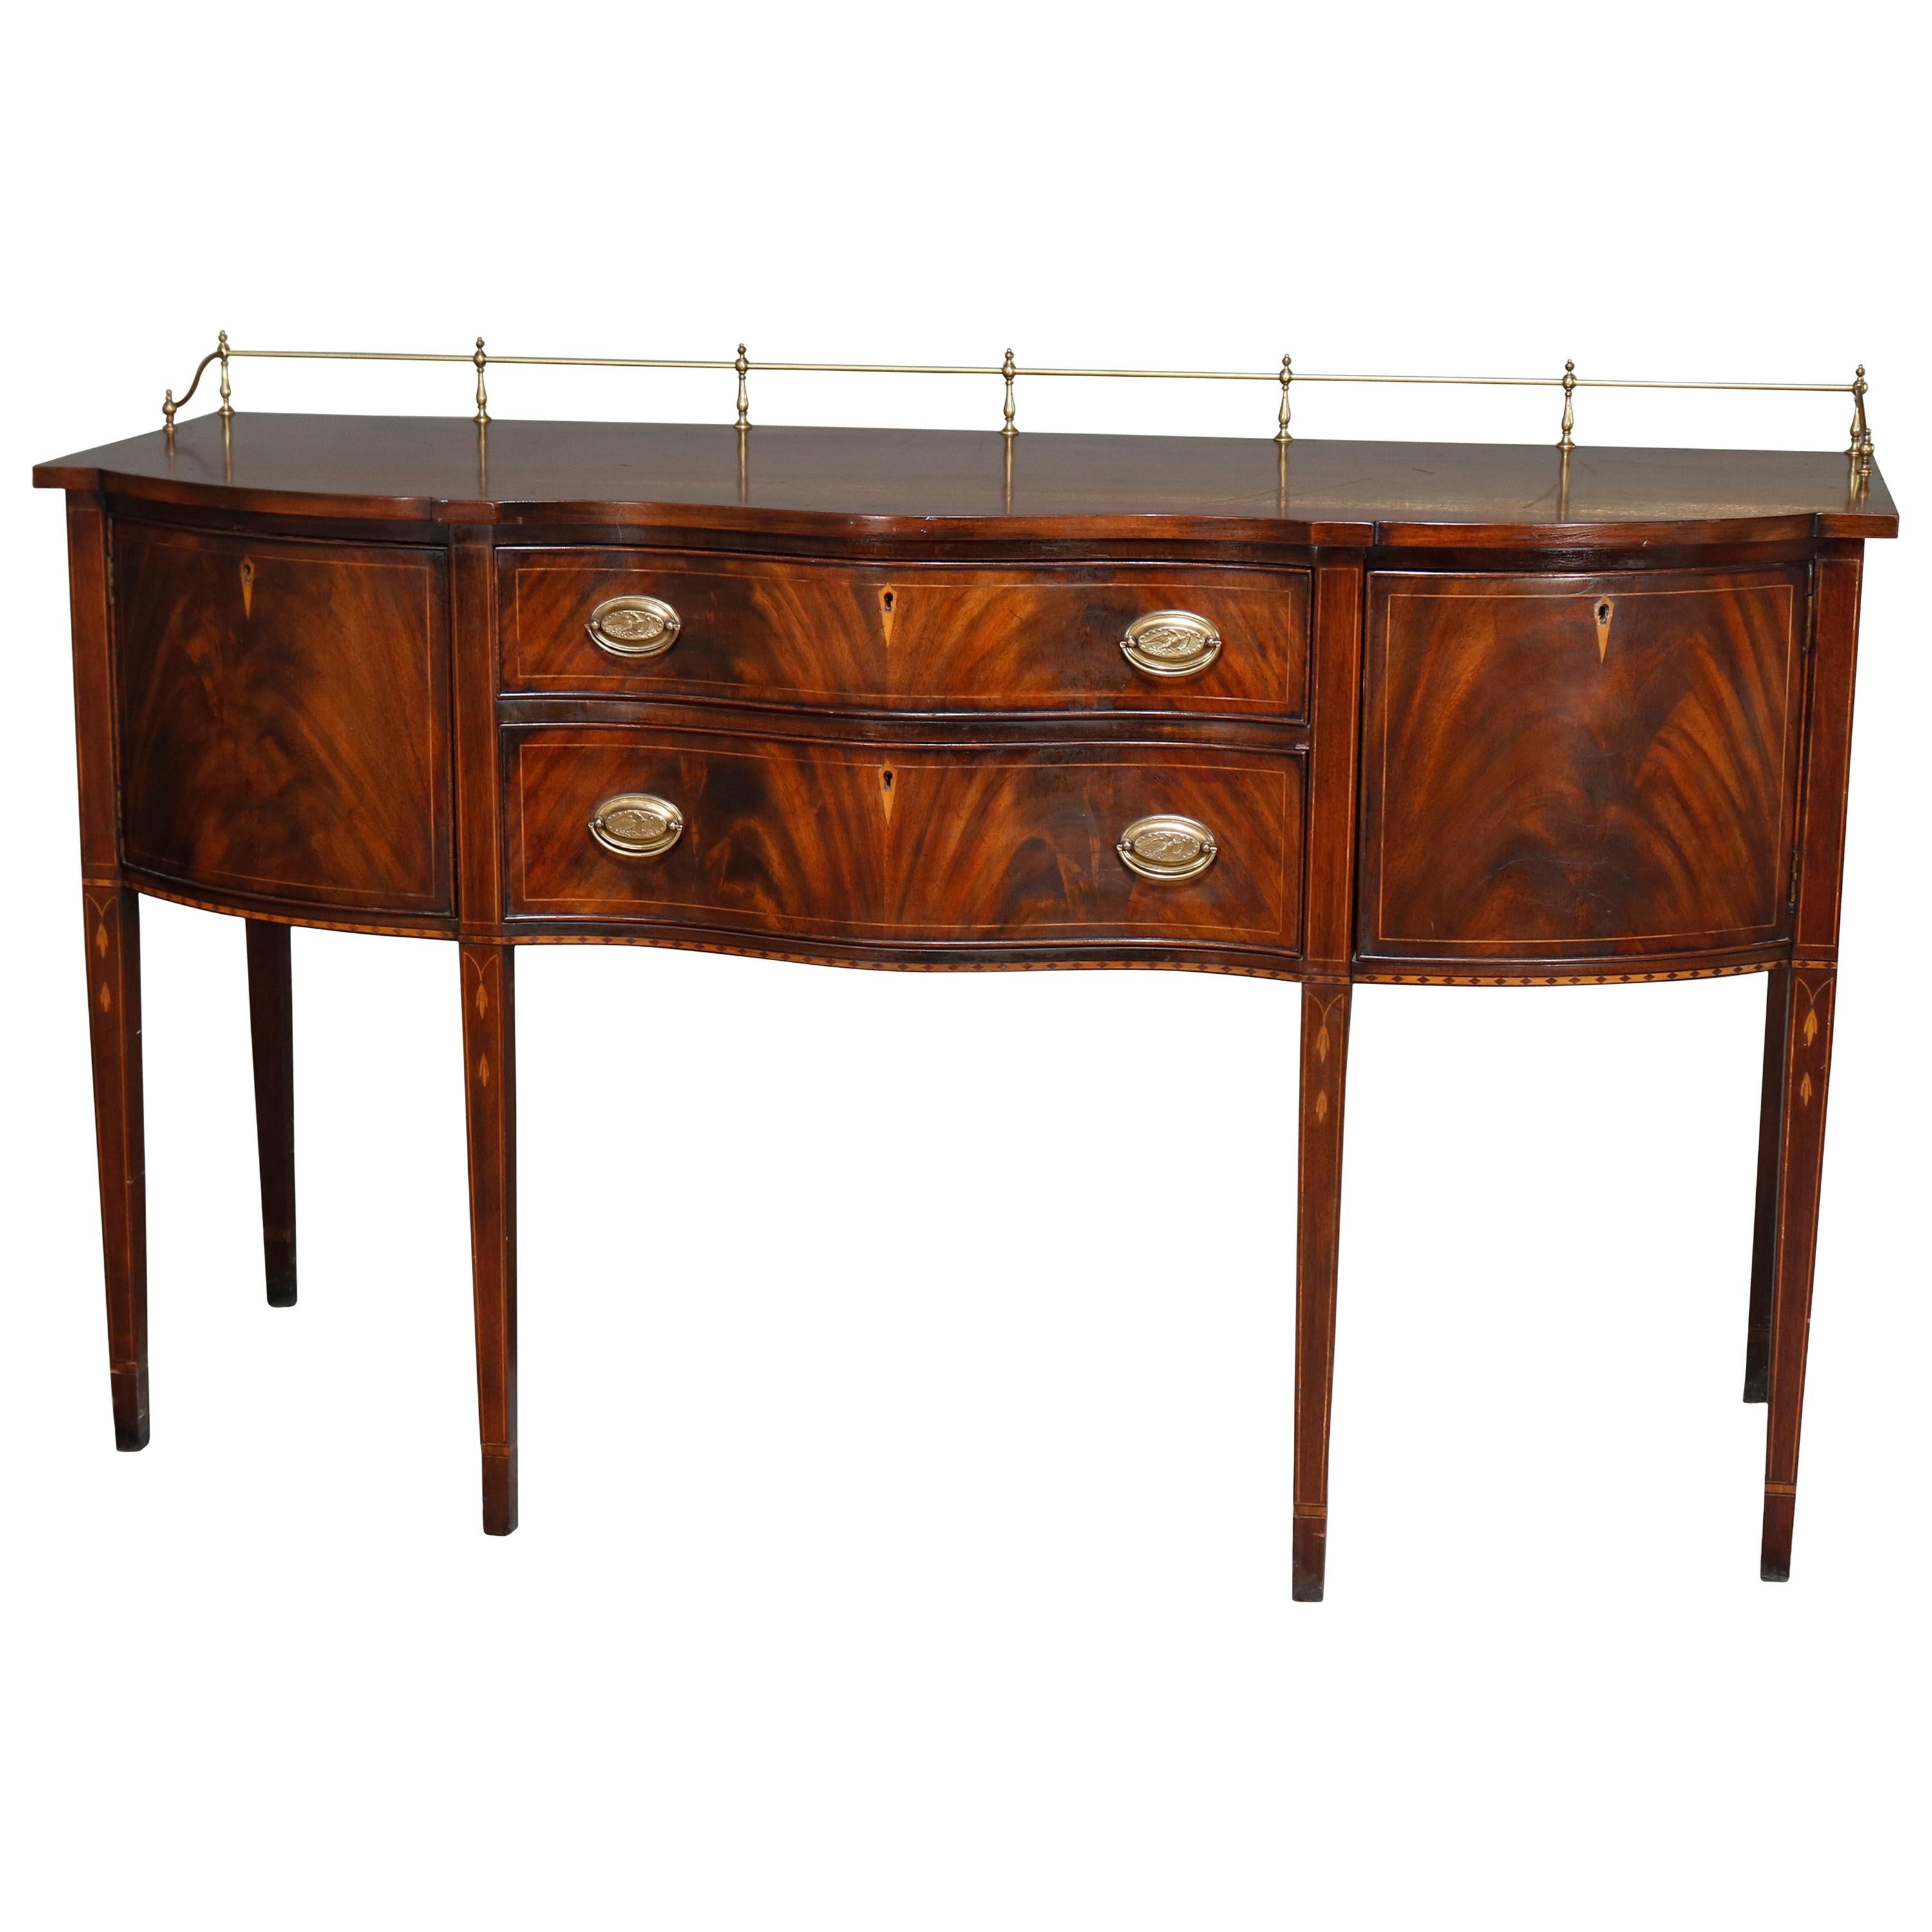 Federal Style Henkel Harris Flame Mahogany Inlaid Sideboard with Brass Rail